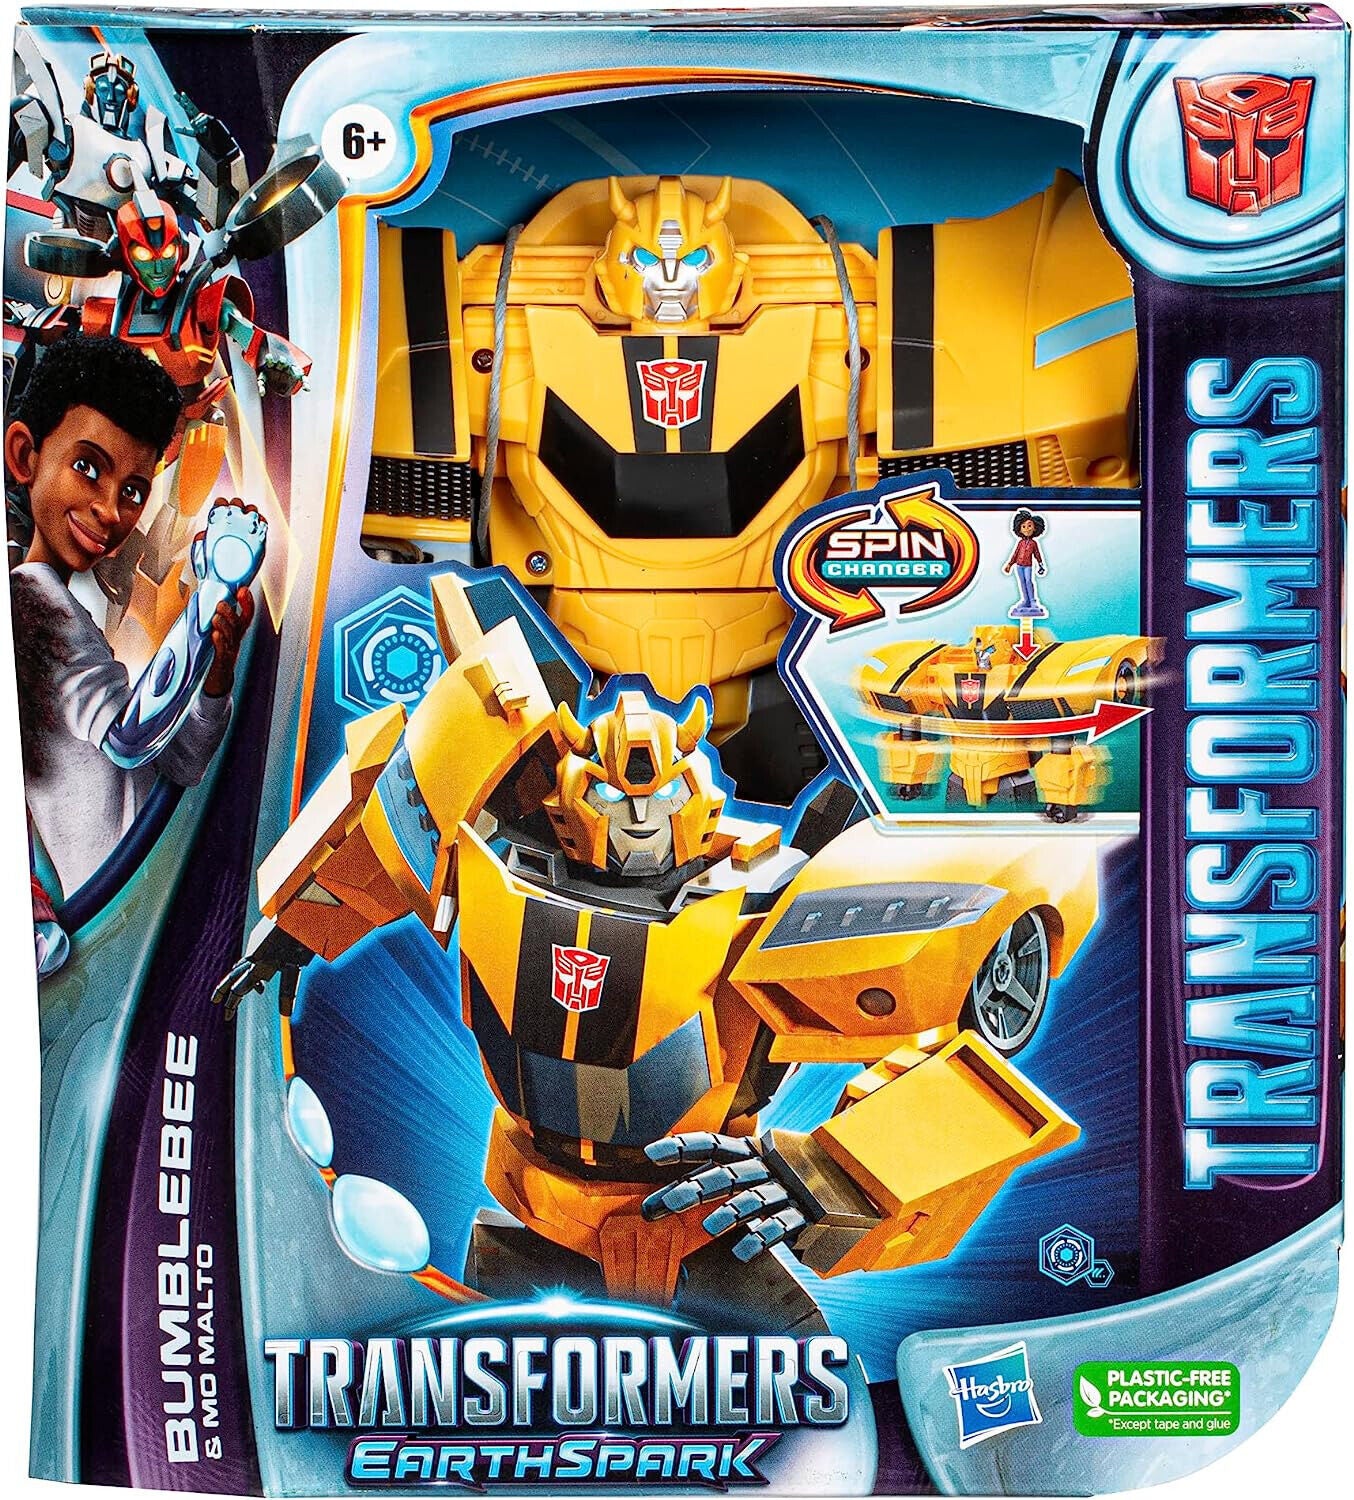 Bumblebee Transformers Earthspark Spin Action Figure Robot - New in Box